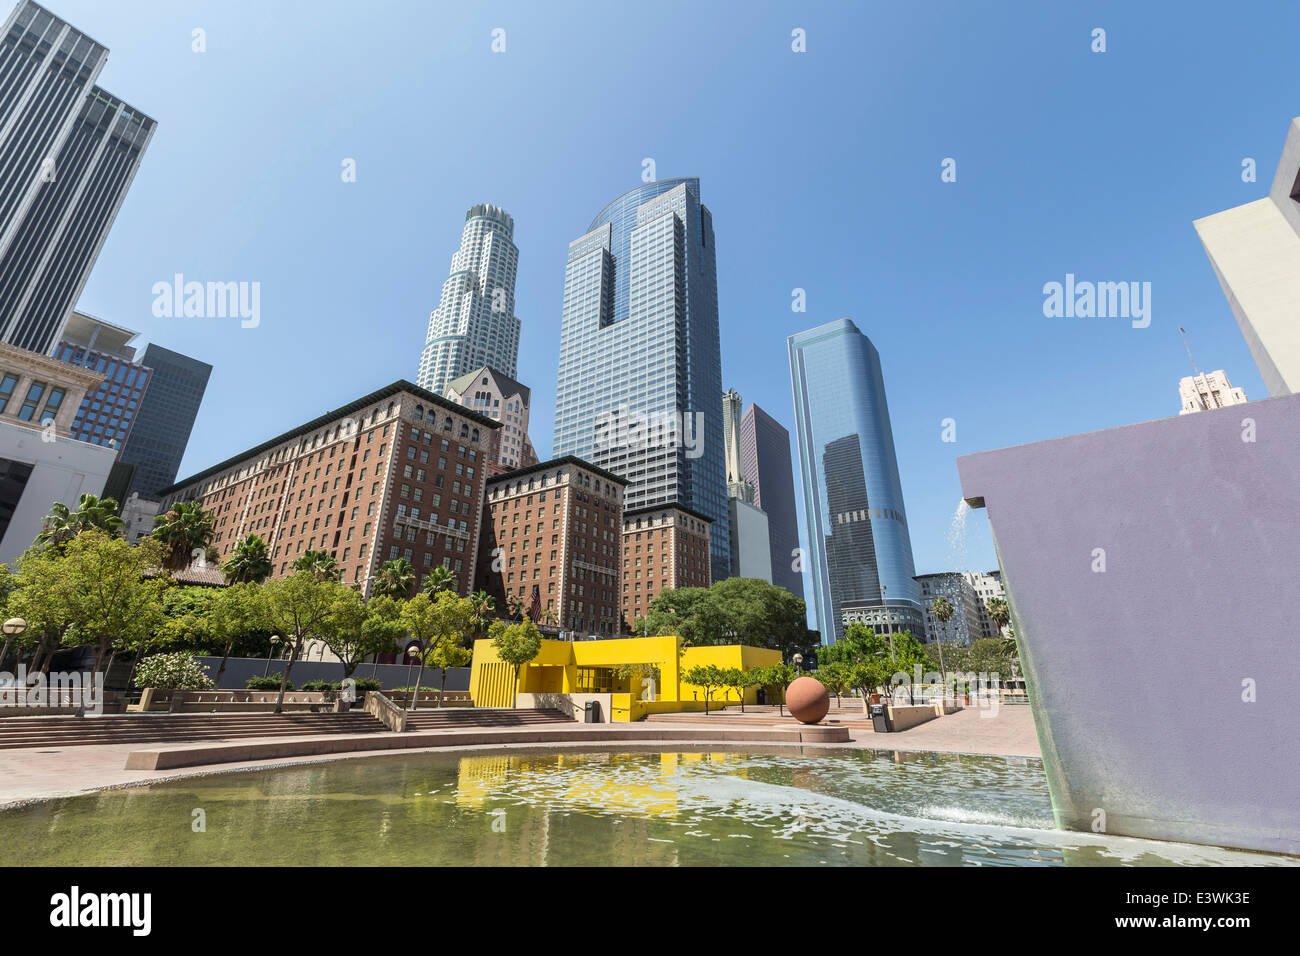 Modernist Pershing Square Park in downtown Los Angeles, California. Stock Photo